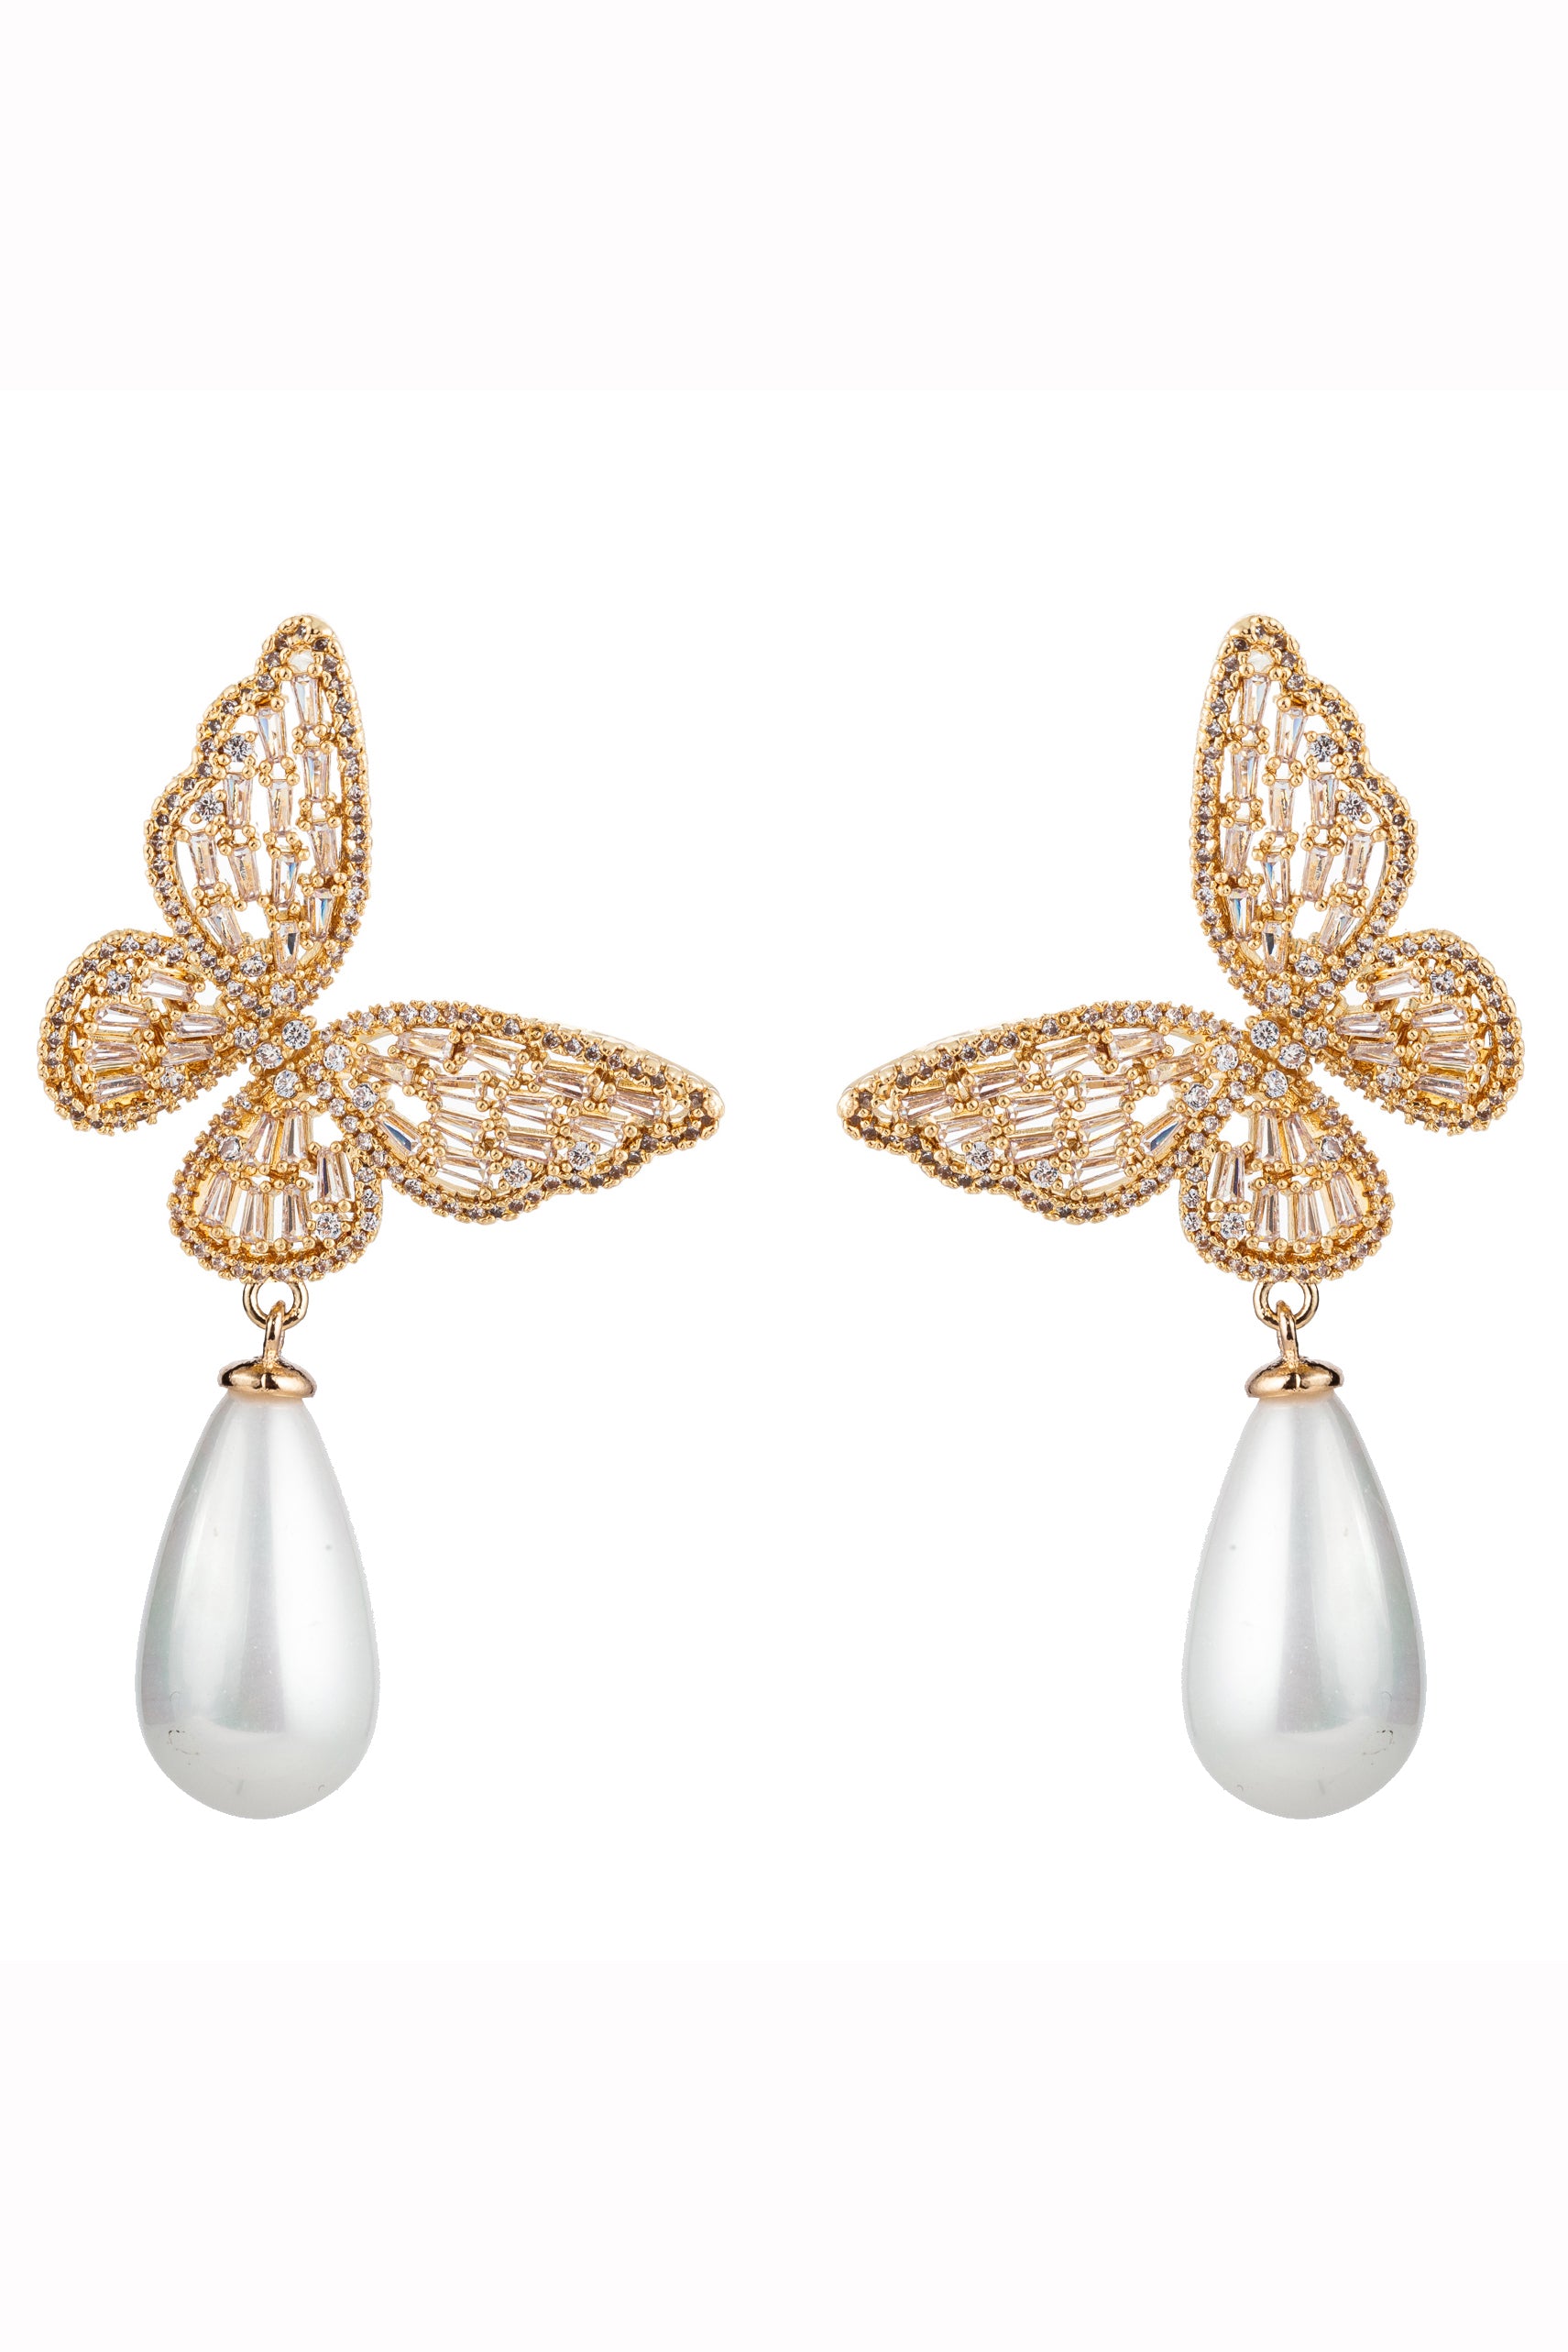 Buy Eye Candy LA Luxe Collection Cz Butterfly Huggie Earrings - Nocolor At  41% Off | Editorialist